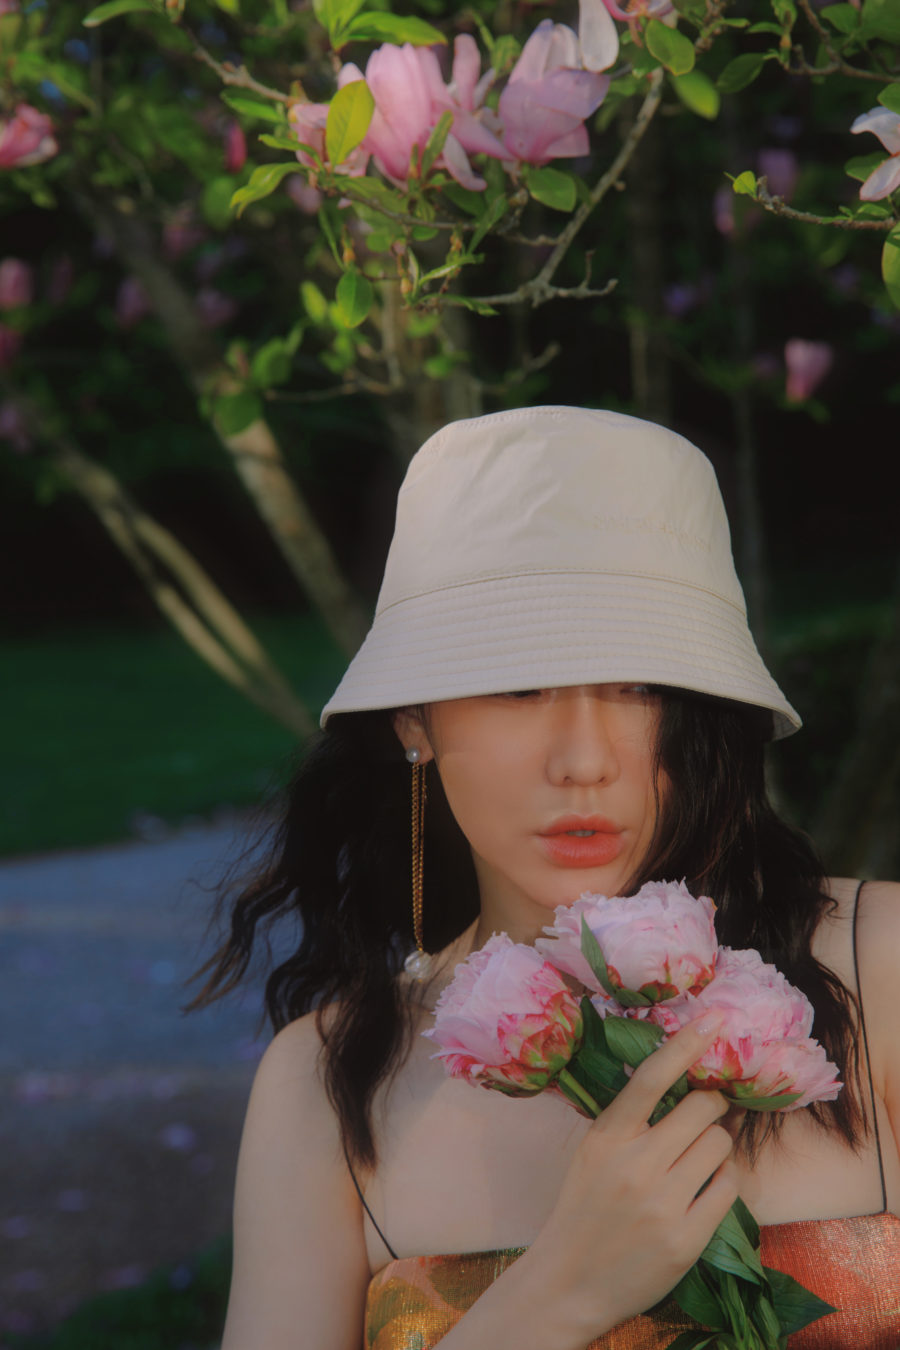 jessica wang wearing a bucket hat and flowers while sharing last minute mother's day gifts at luisaviaroma // Jessica Wang - Notjessfashion.com